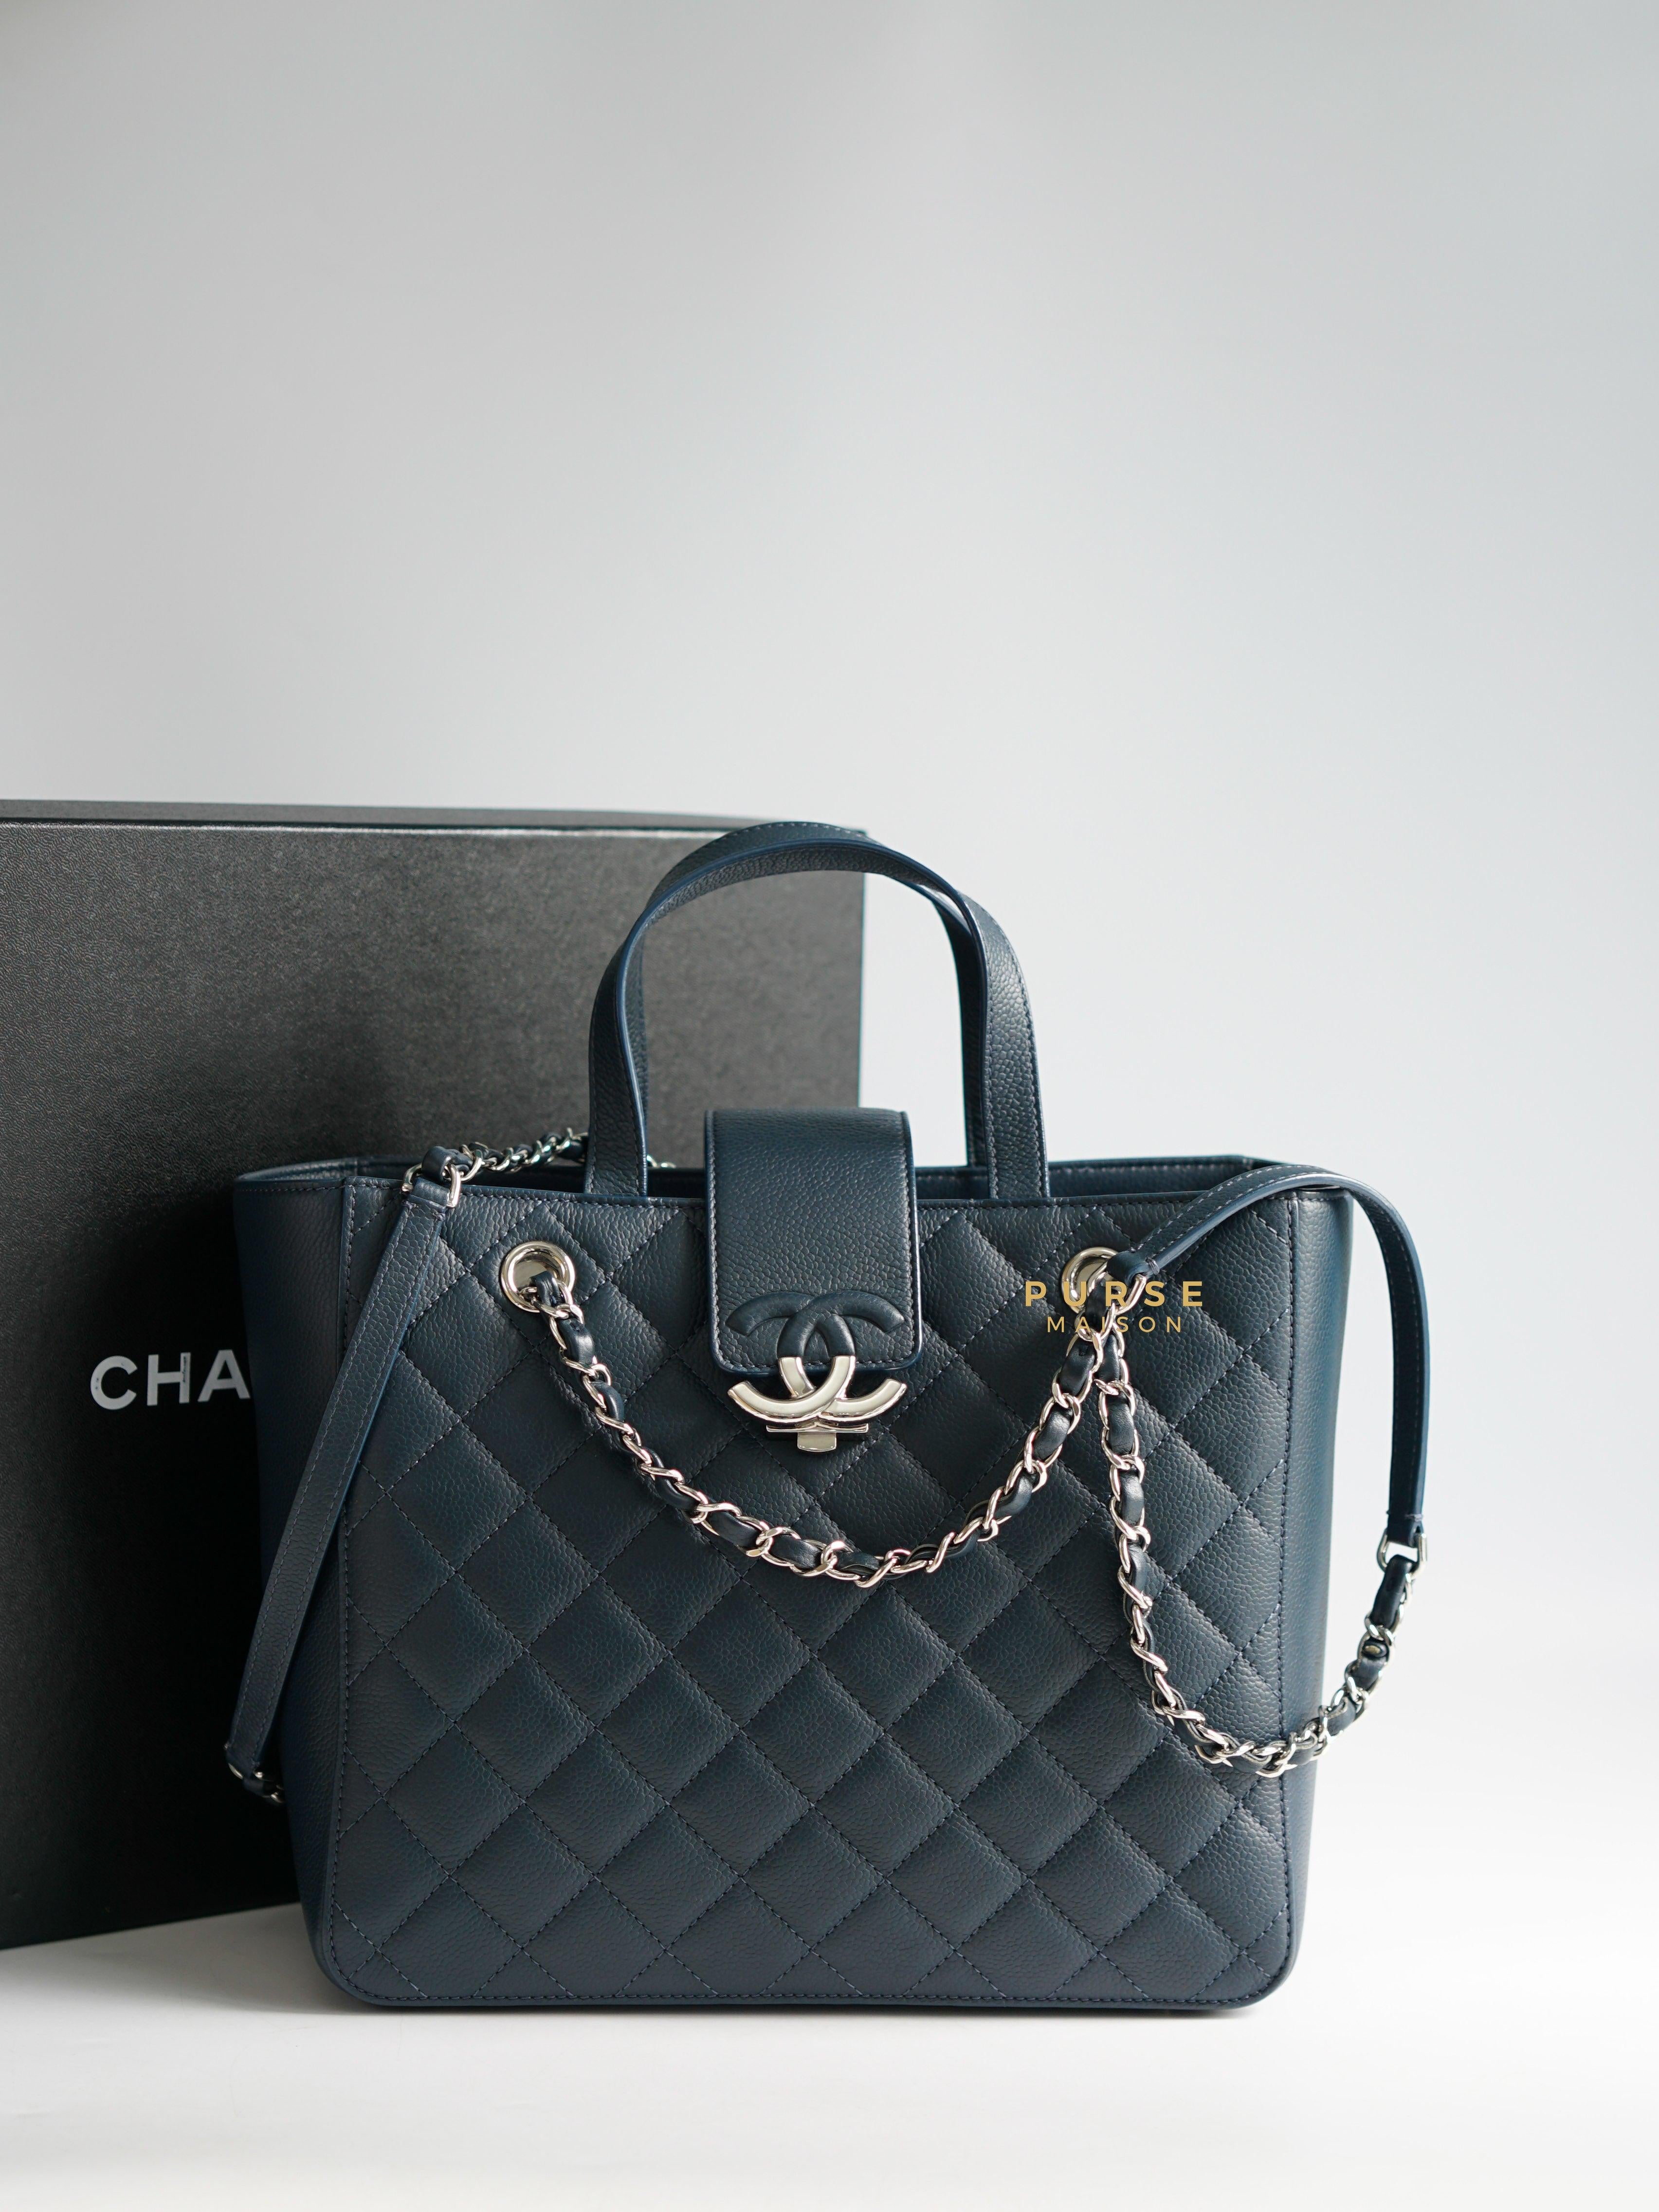 Chanel Small CC Box Shopping Tote Navy Blue Caviar & Silver Hardware Series 24 | Purse Maison Luxury Bags Shop